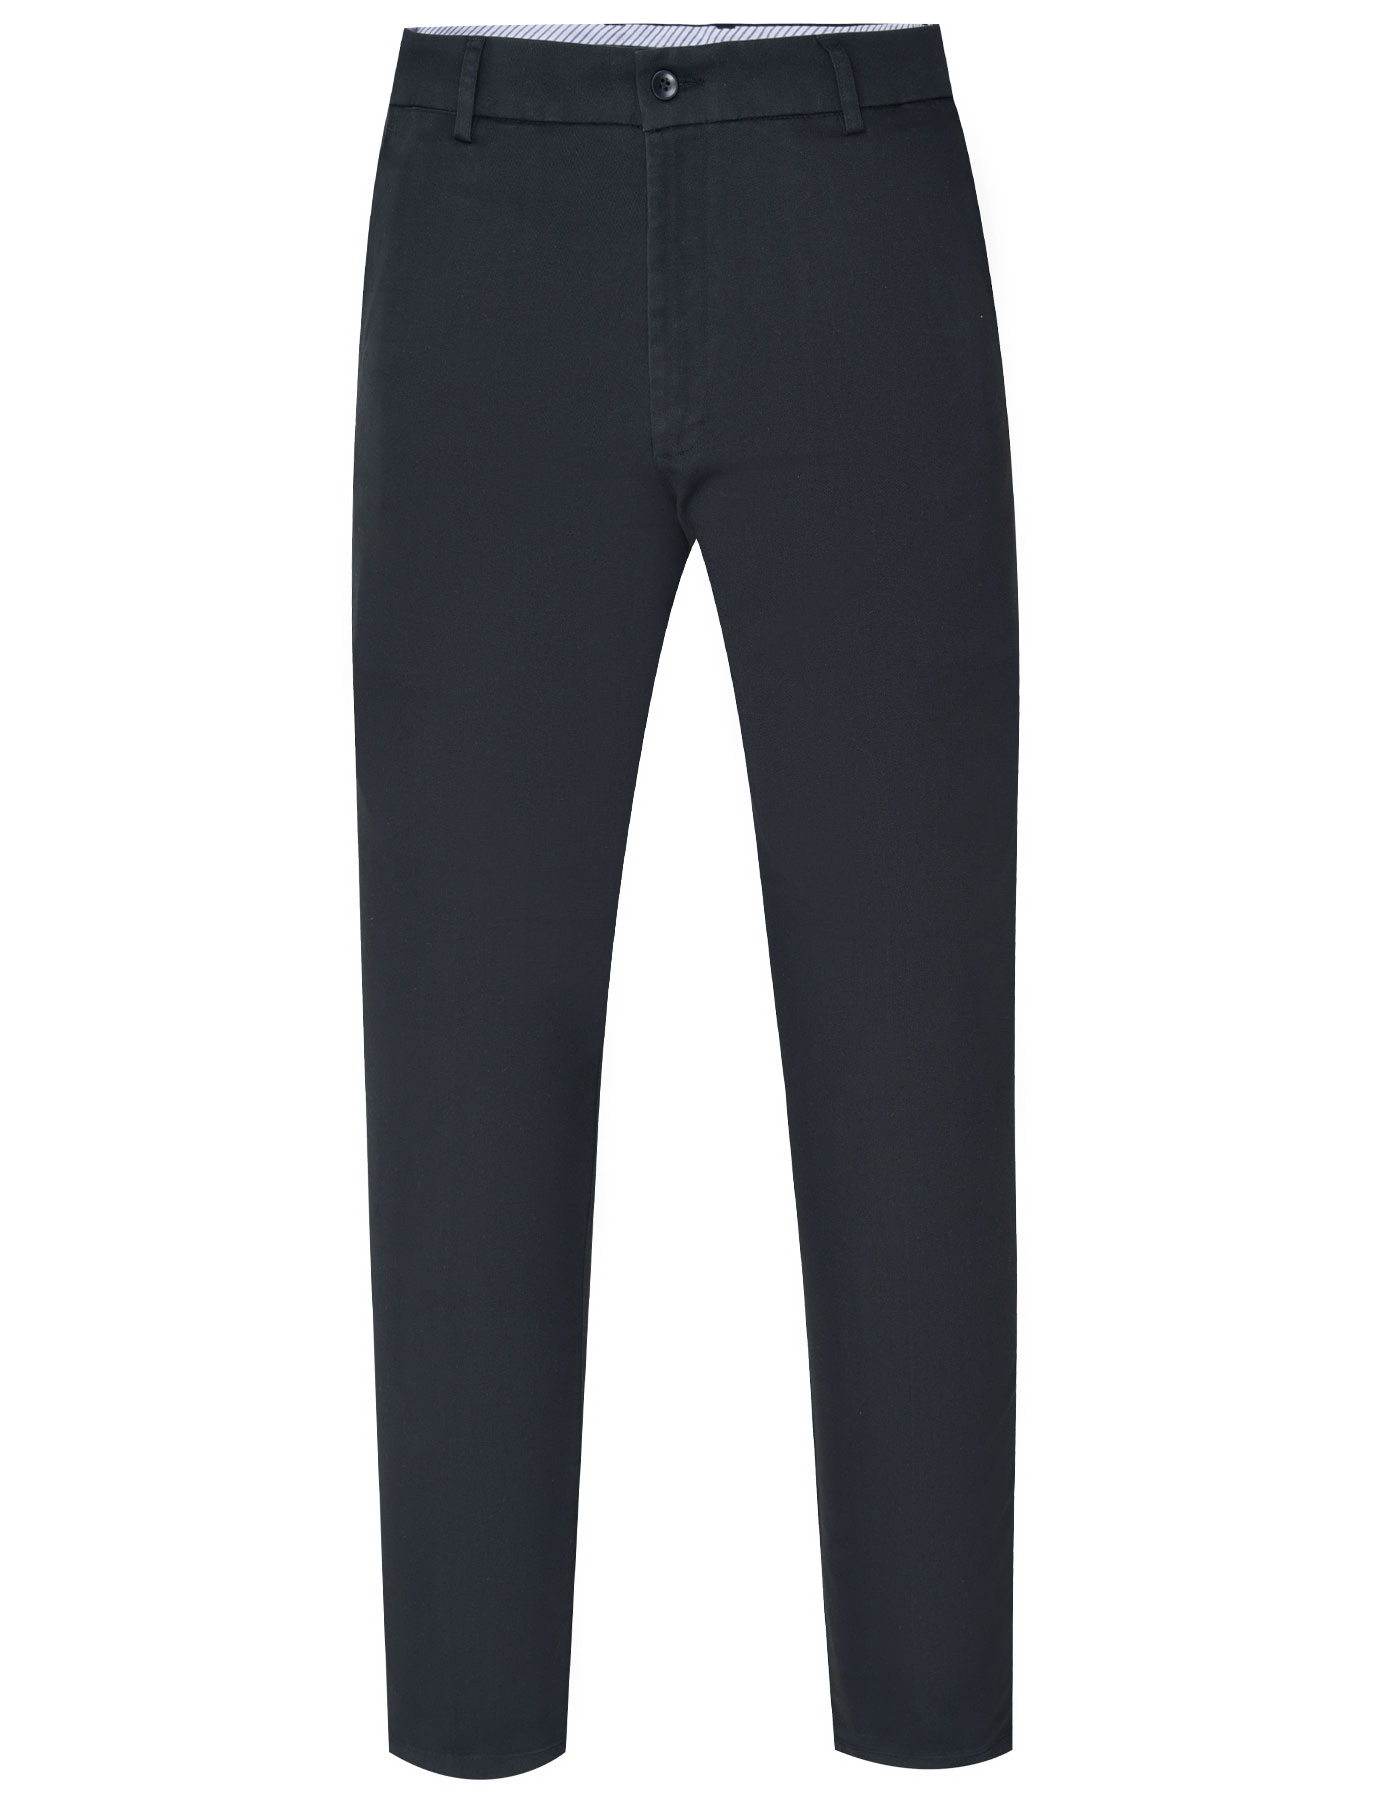 Trousers & Lowers - Black - men - 9.694 products | FASHIOLA INDIA-saigonsouth.com.vn